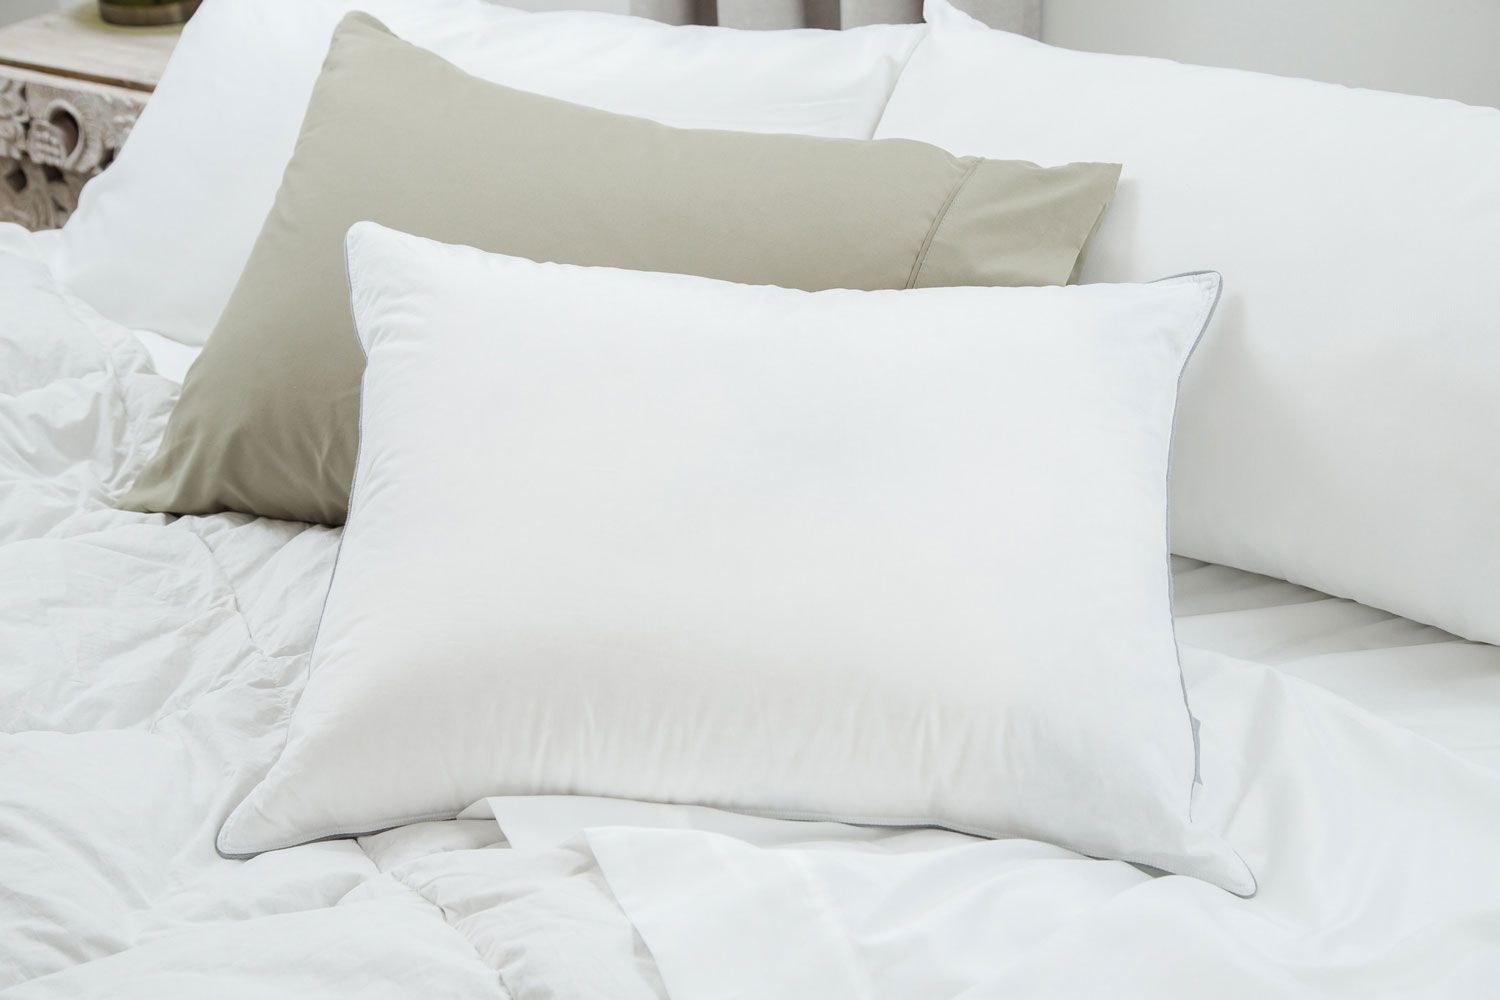 How Big Are King Size Pillows